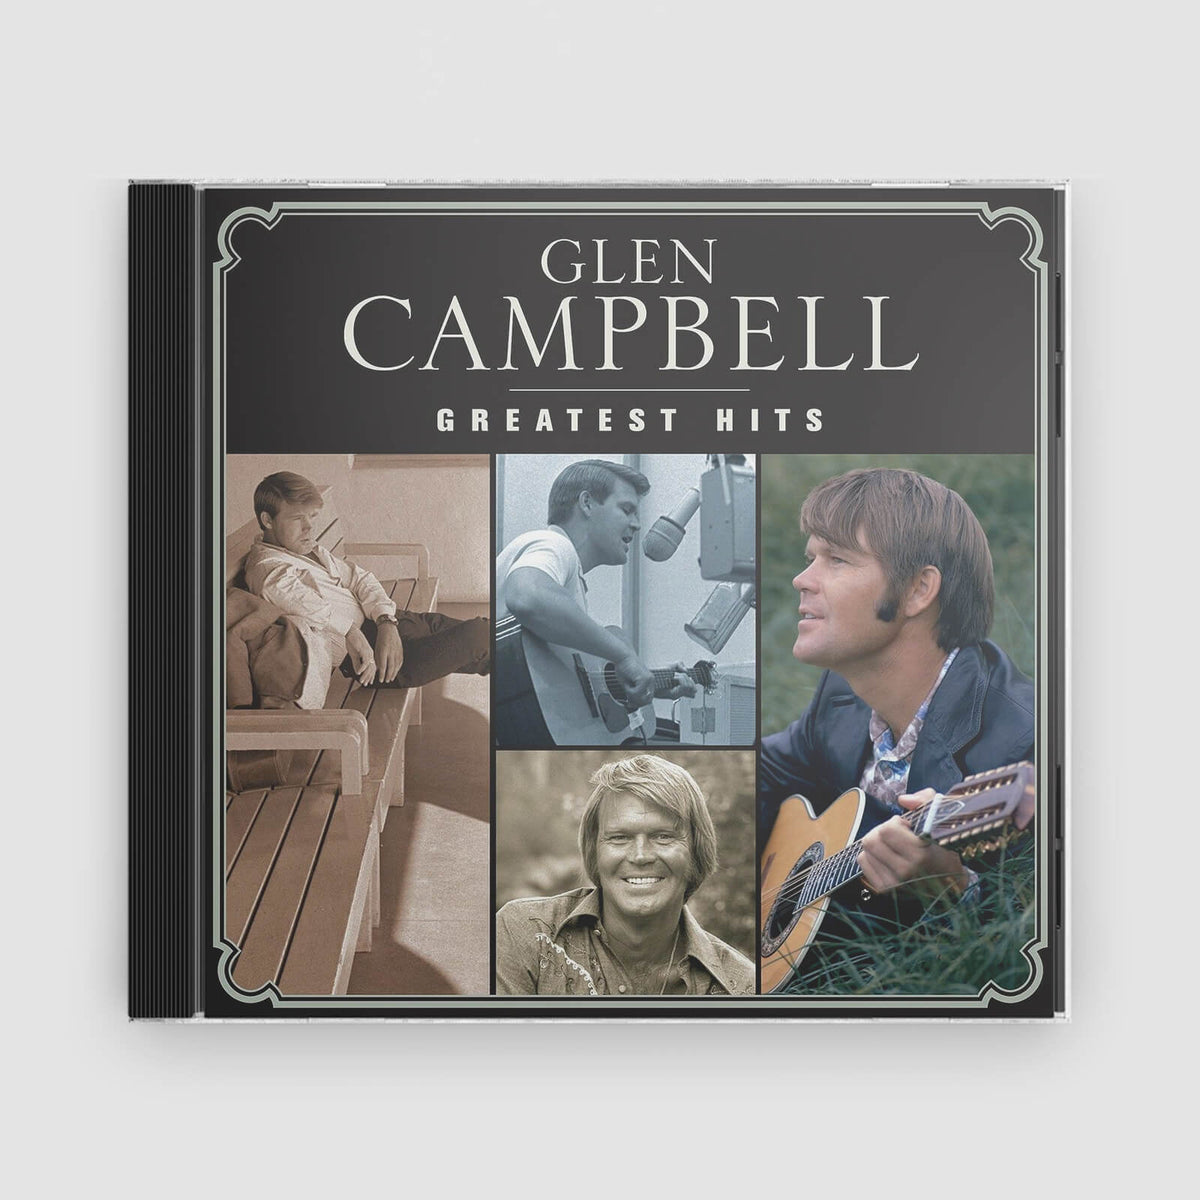 Glen Campbell : Greatest Hits